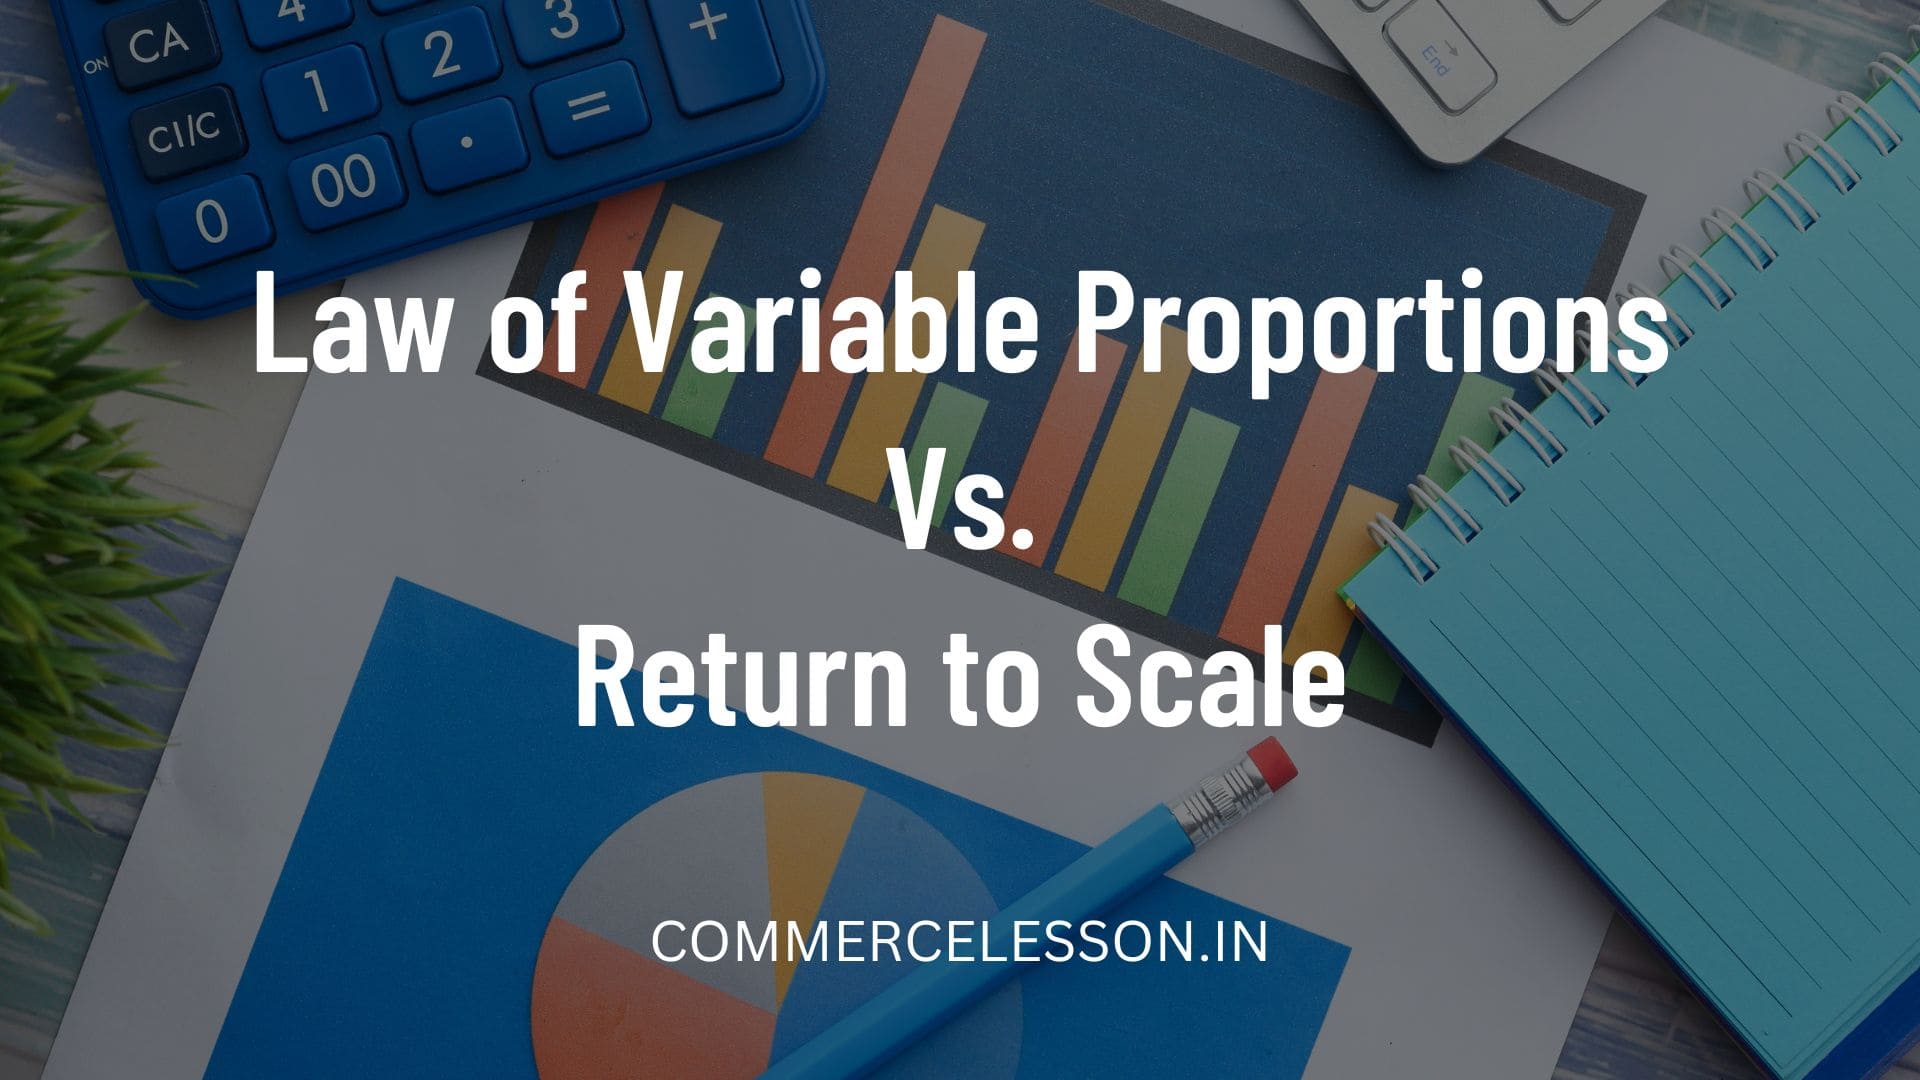 Difference between Law of Variable Proportions and Return to Scale